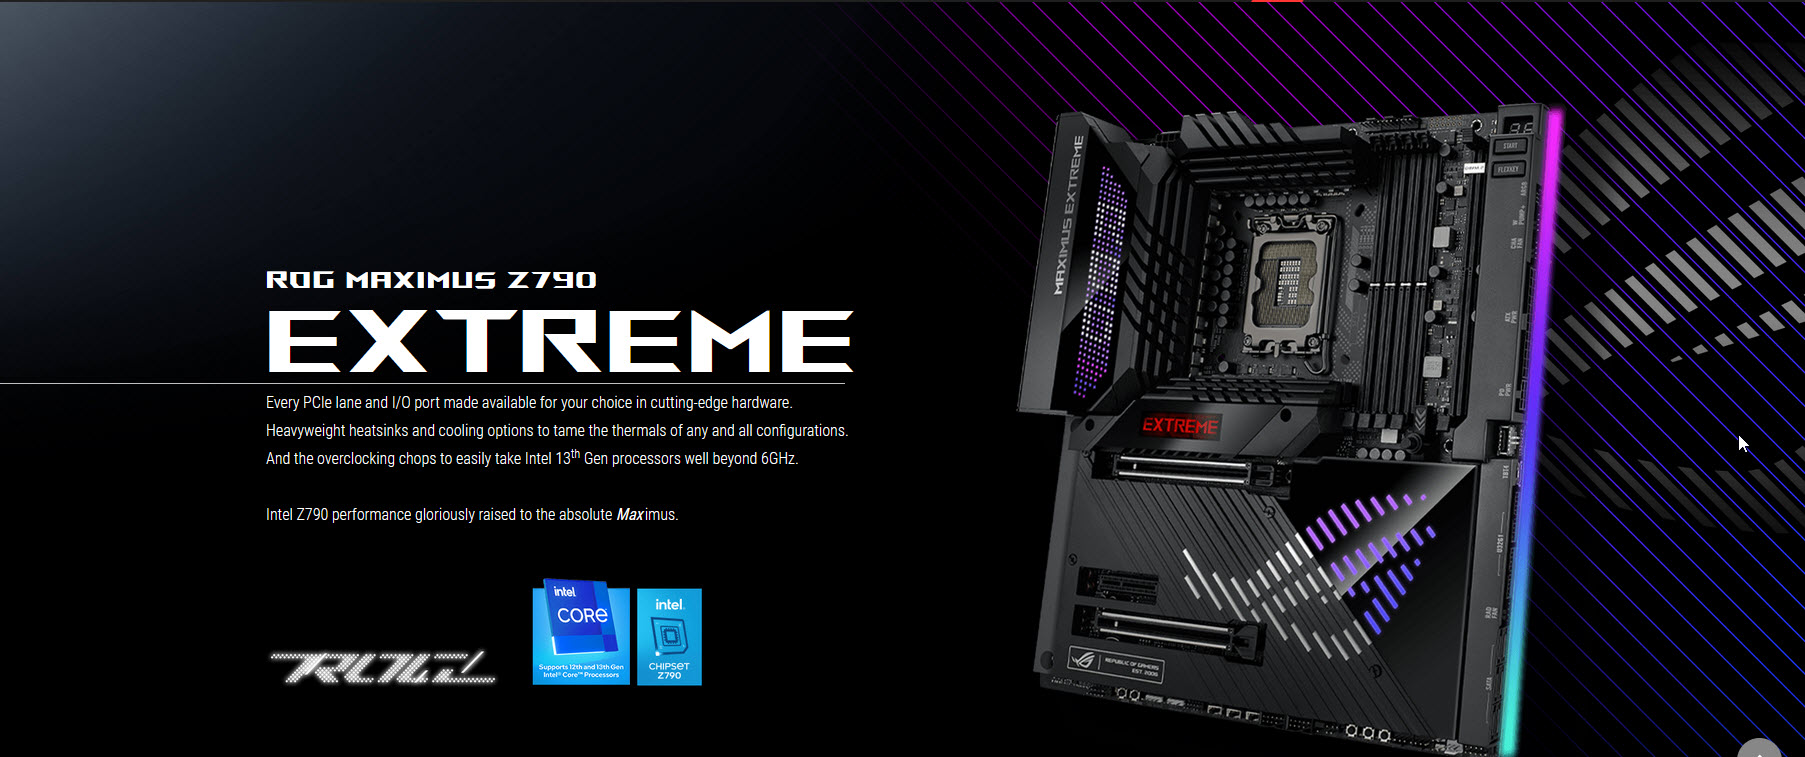 2022 10 27 21 12 54 ASUS ROG MAXIMUS Z790 EXTREME REVIEW